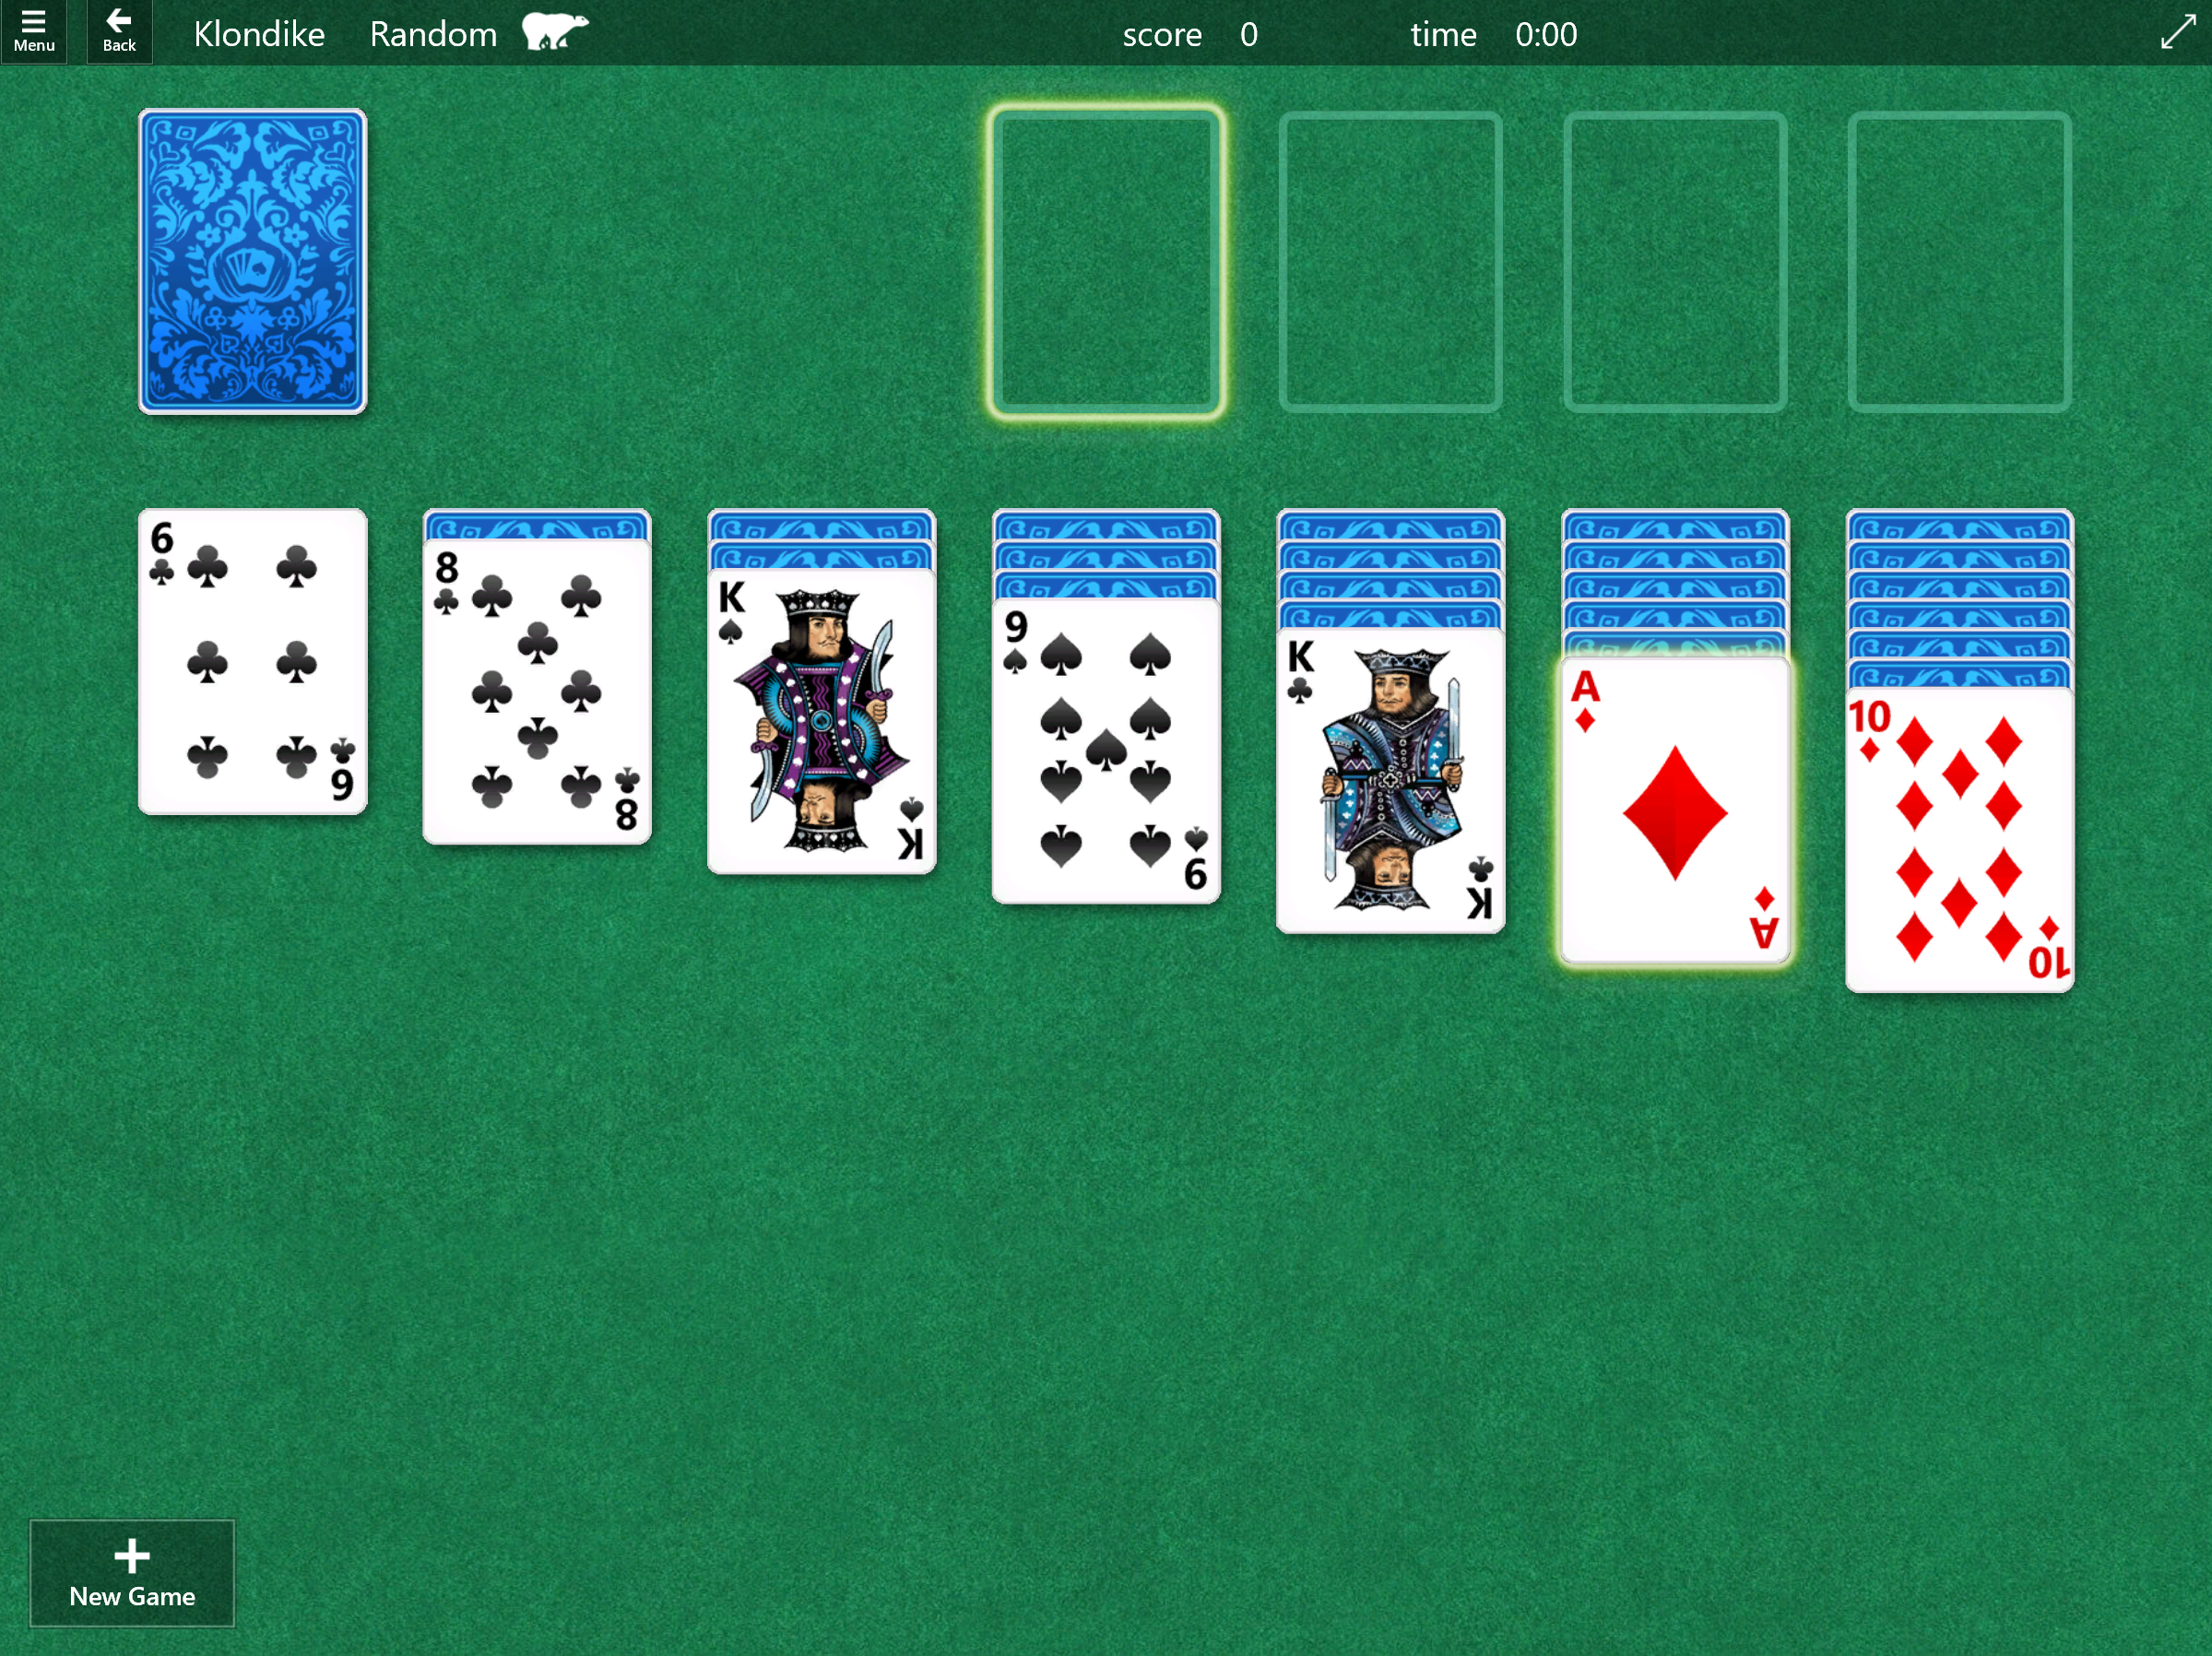 Microsoft Solitaire Collection, Video Game